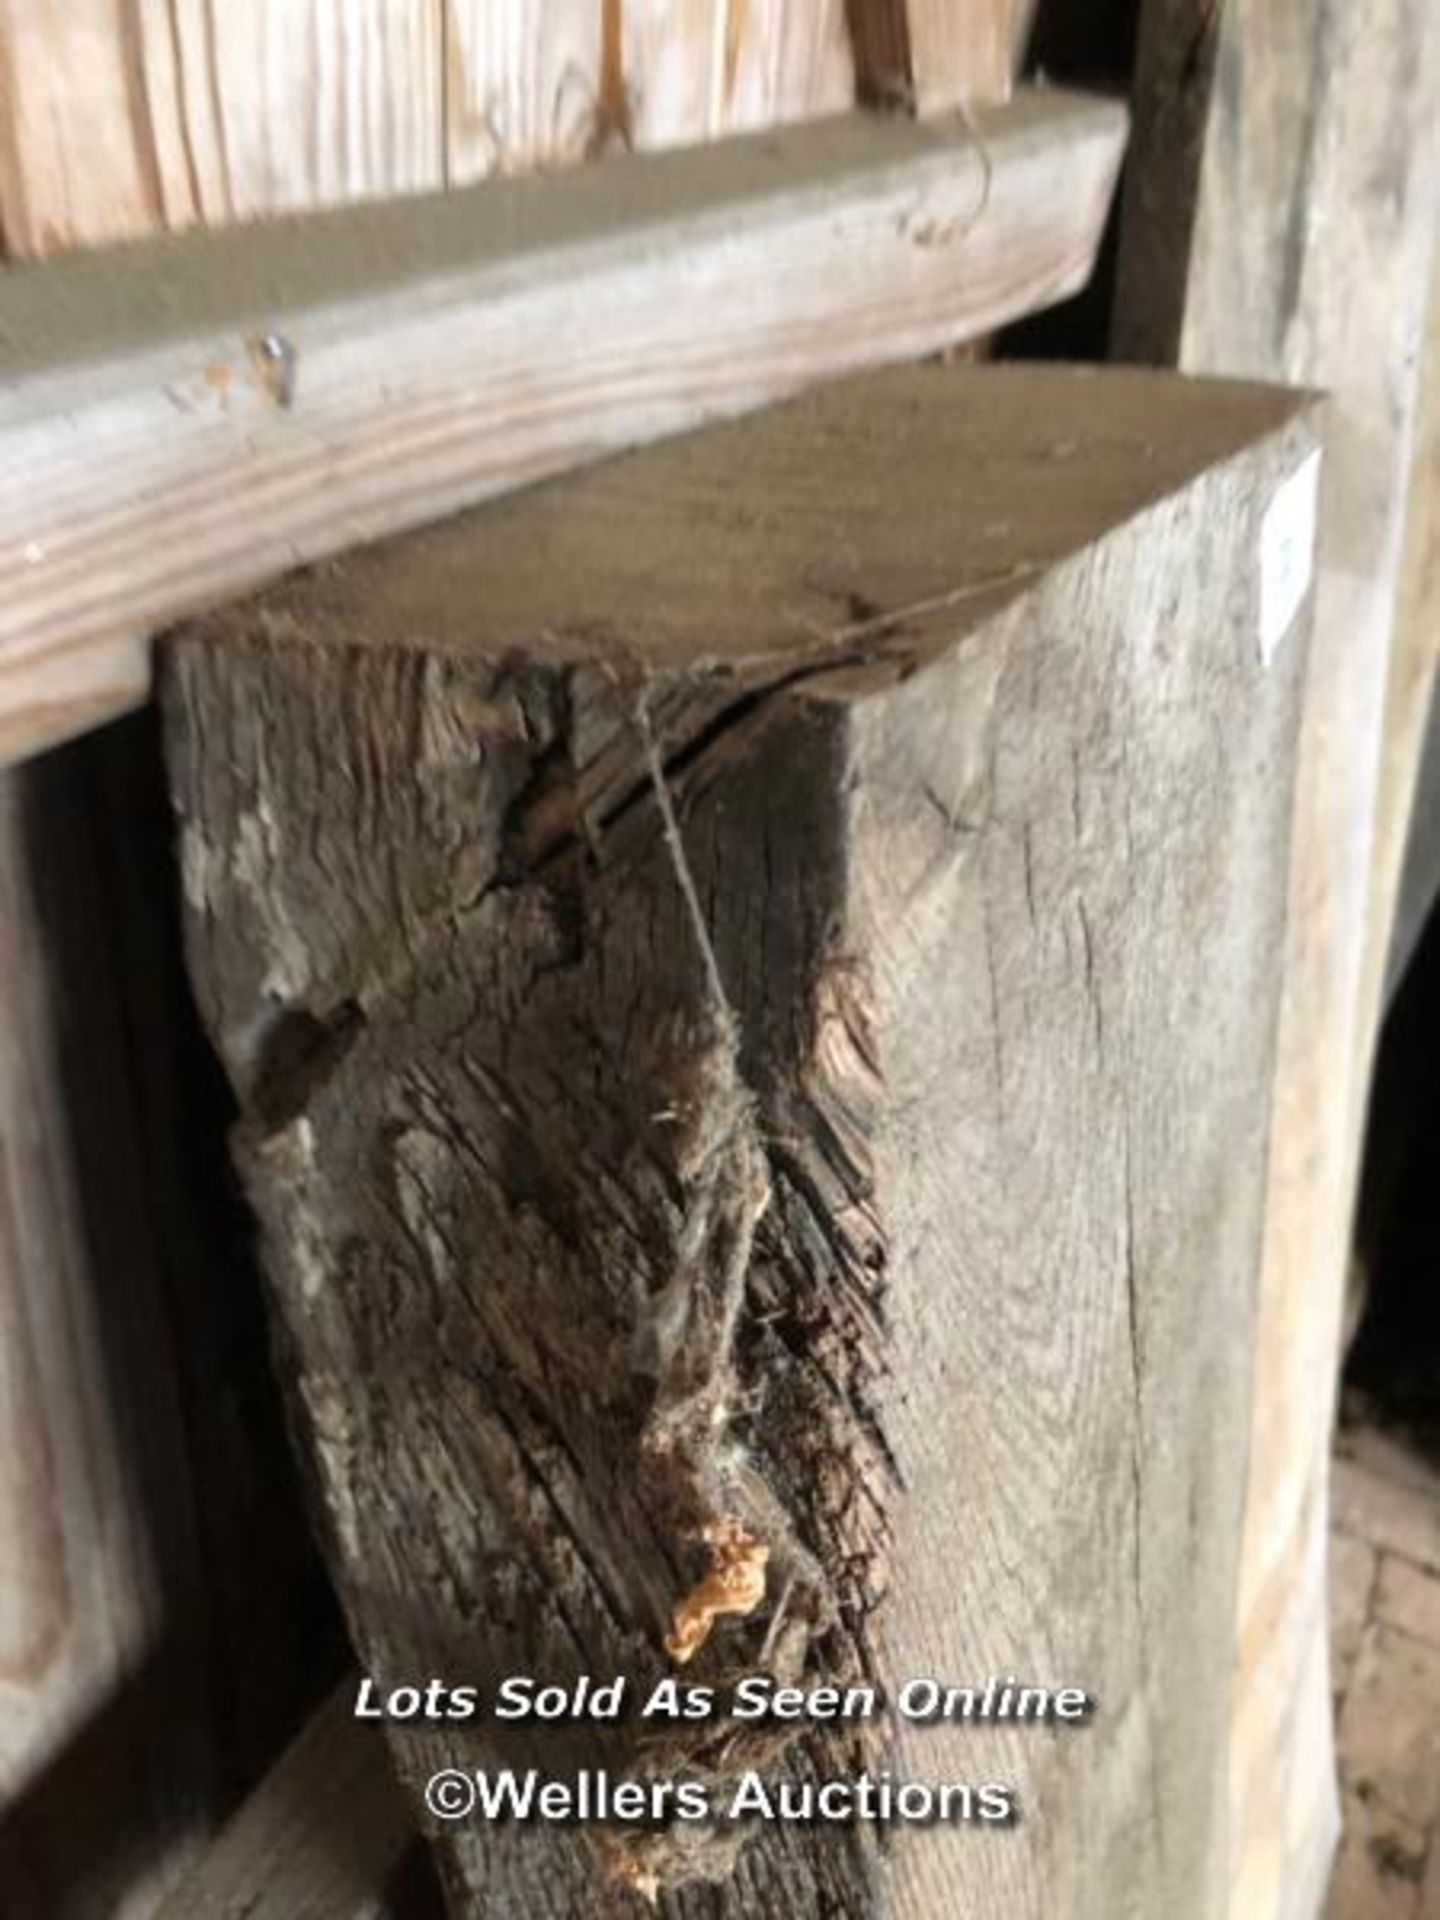 *OAK FIREPLACE BEAM DOOR HEAD, 15CM (D) / ITEM LOCATION: GU8, FULL ADDRESS WILL BE GIVEN TO - Image 2 of 3